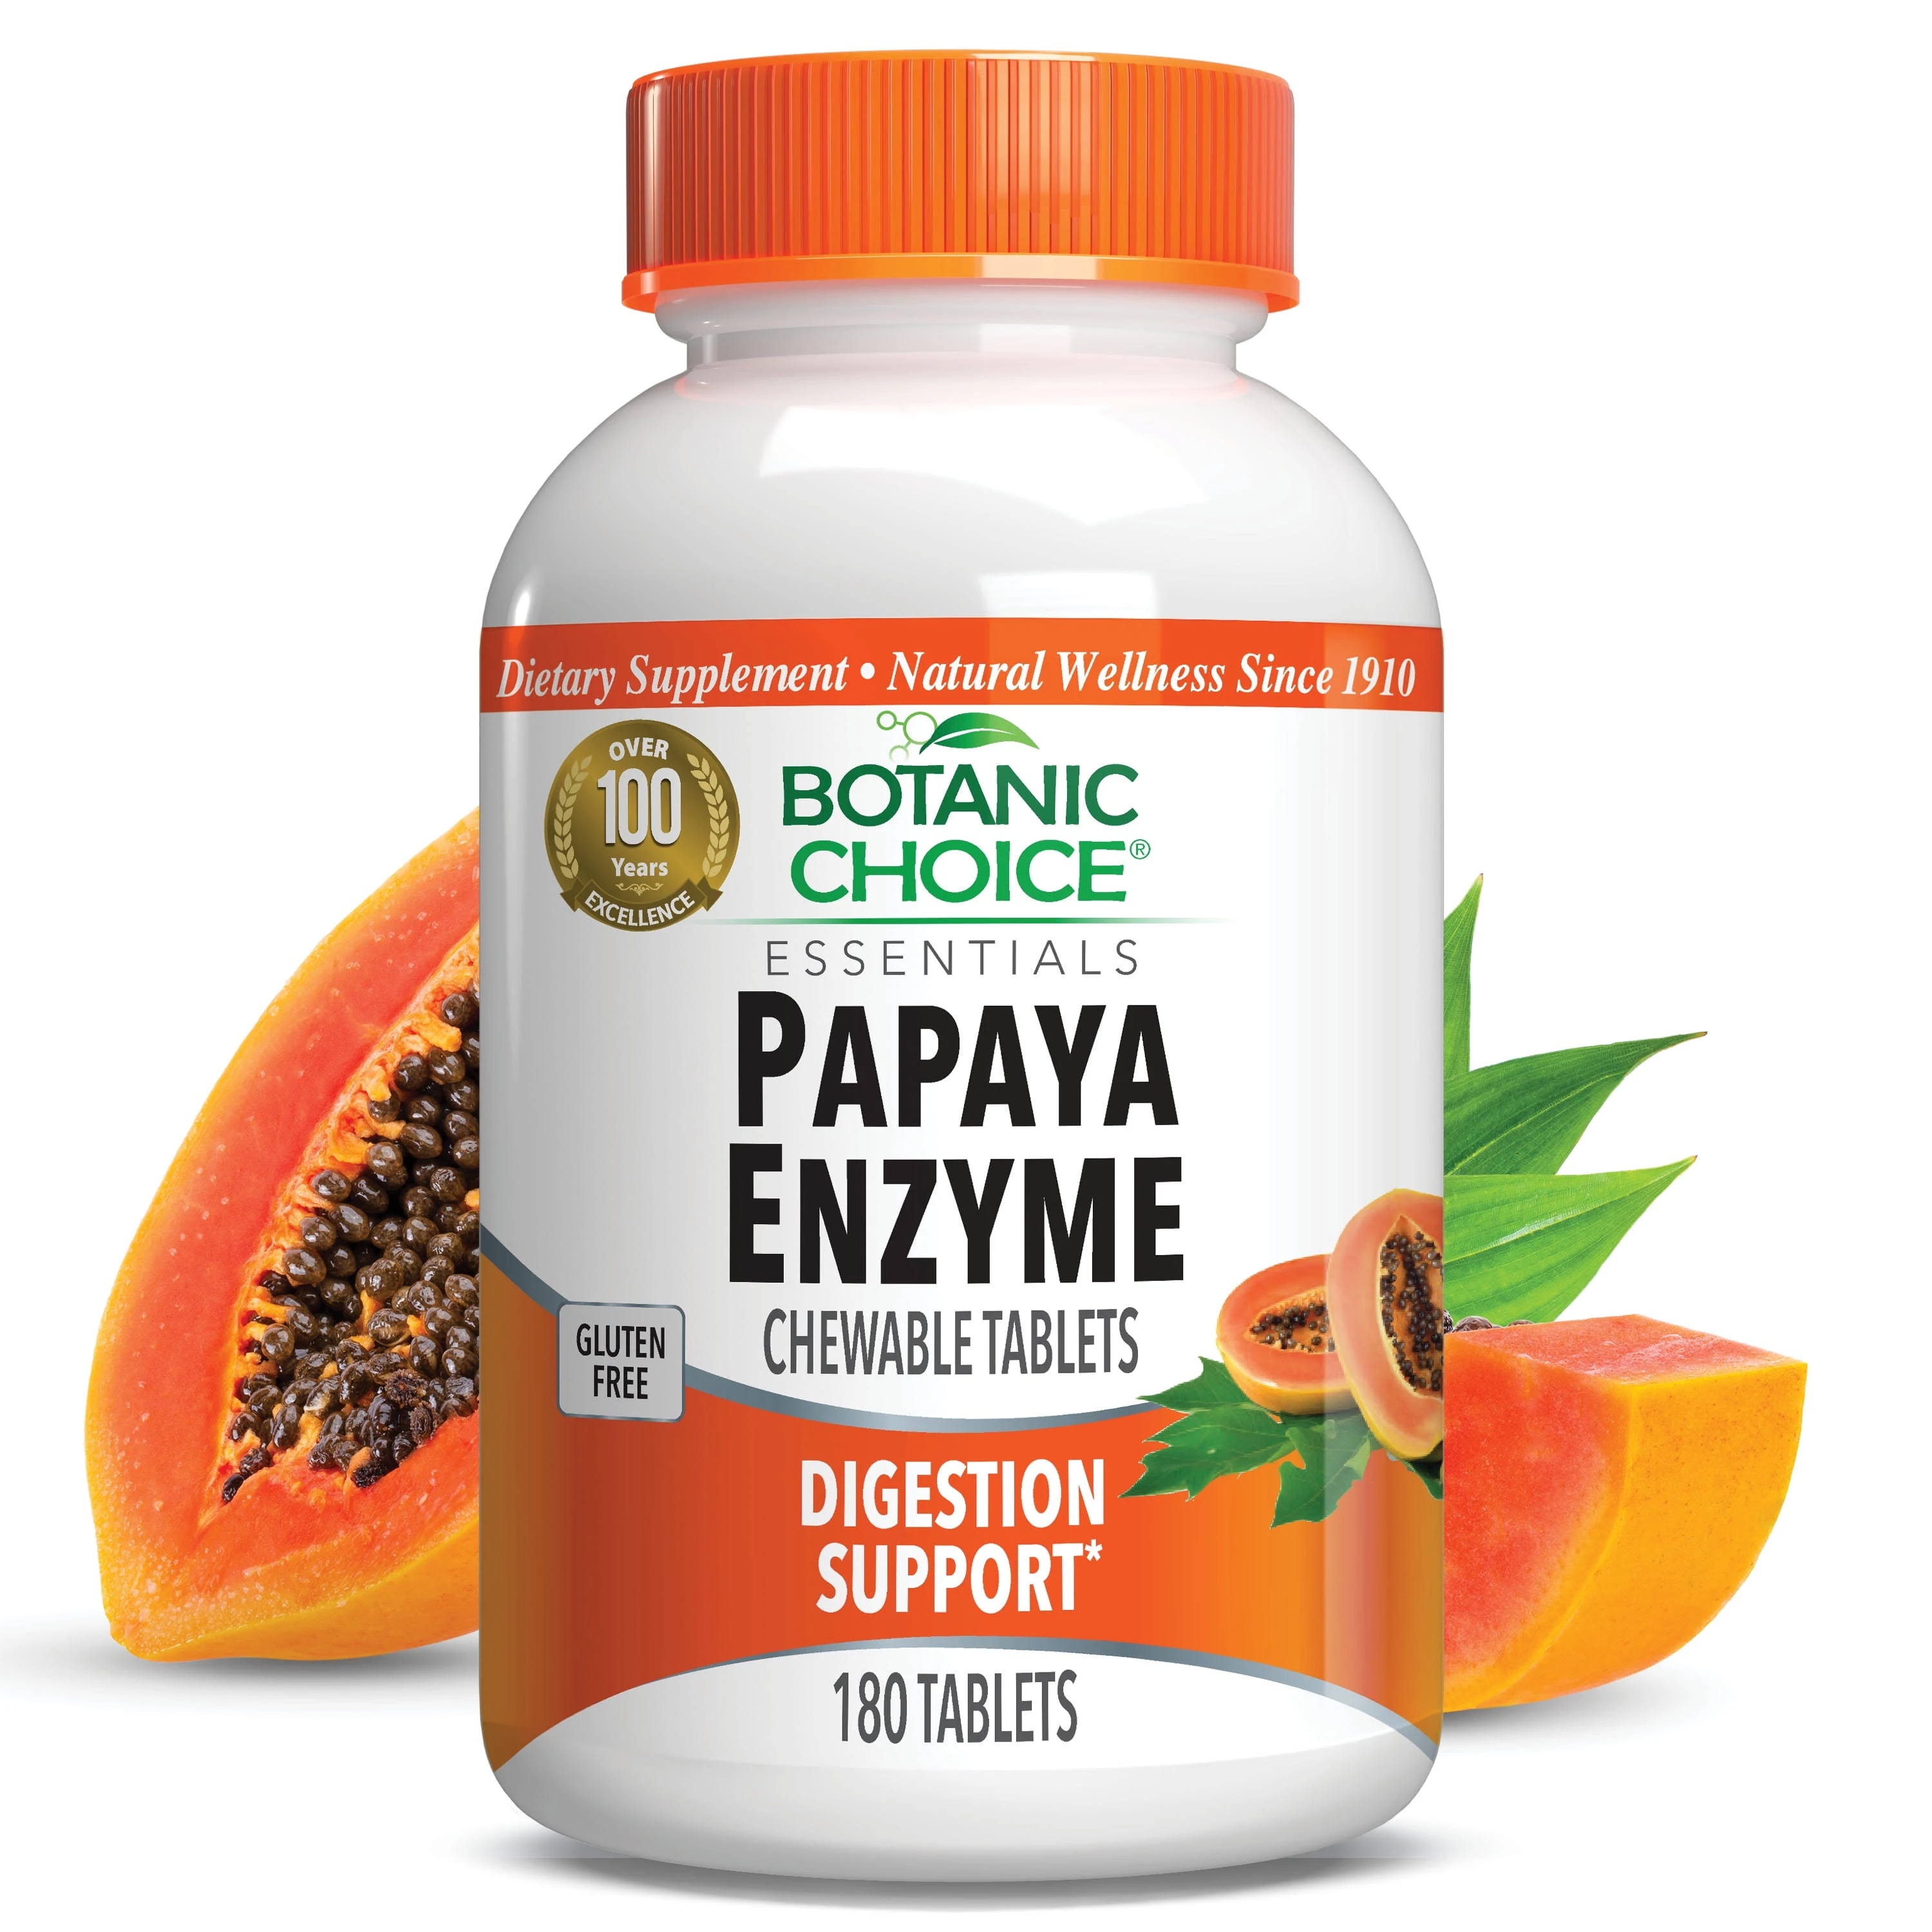 Papaya Enzyme Chewable Tablets for Digestive Support | Image